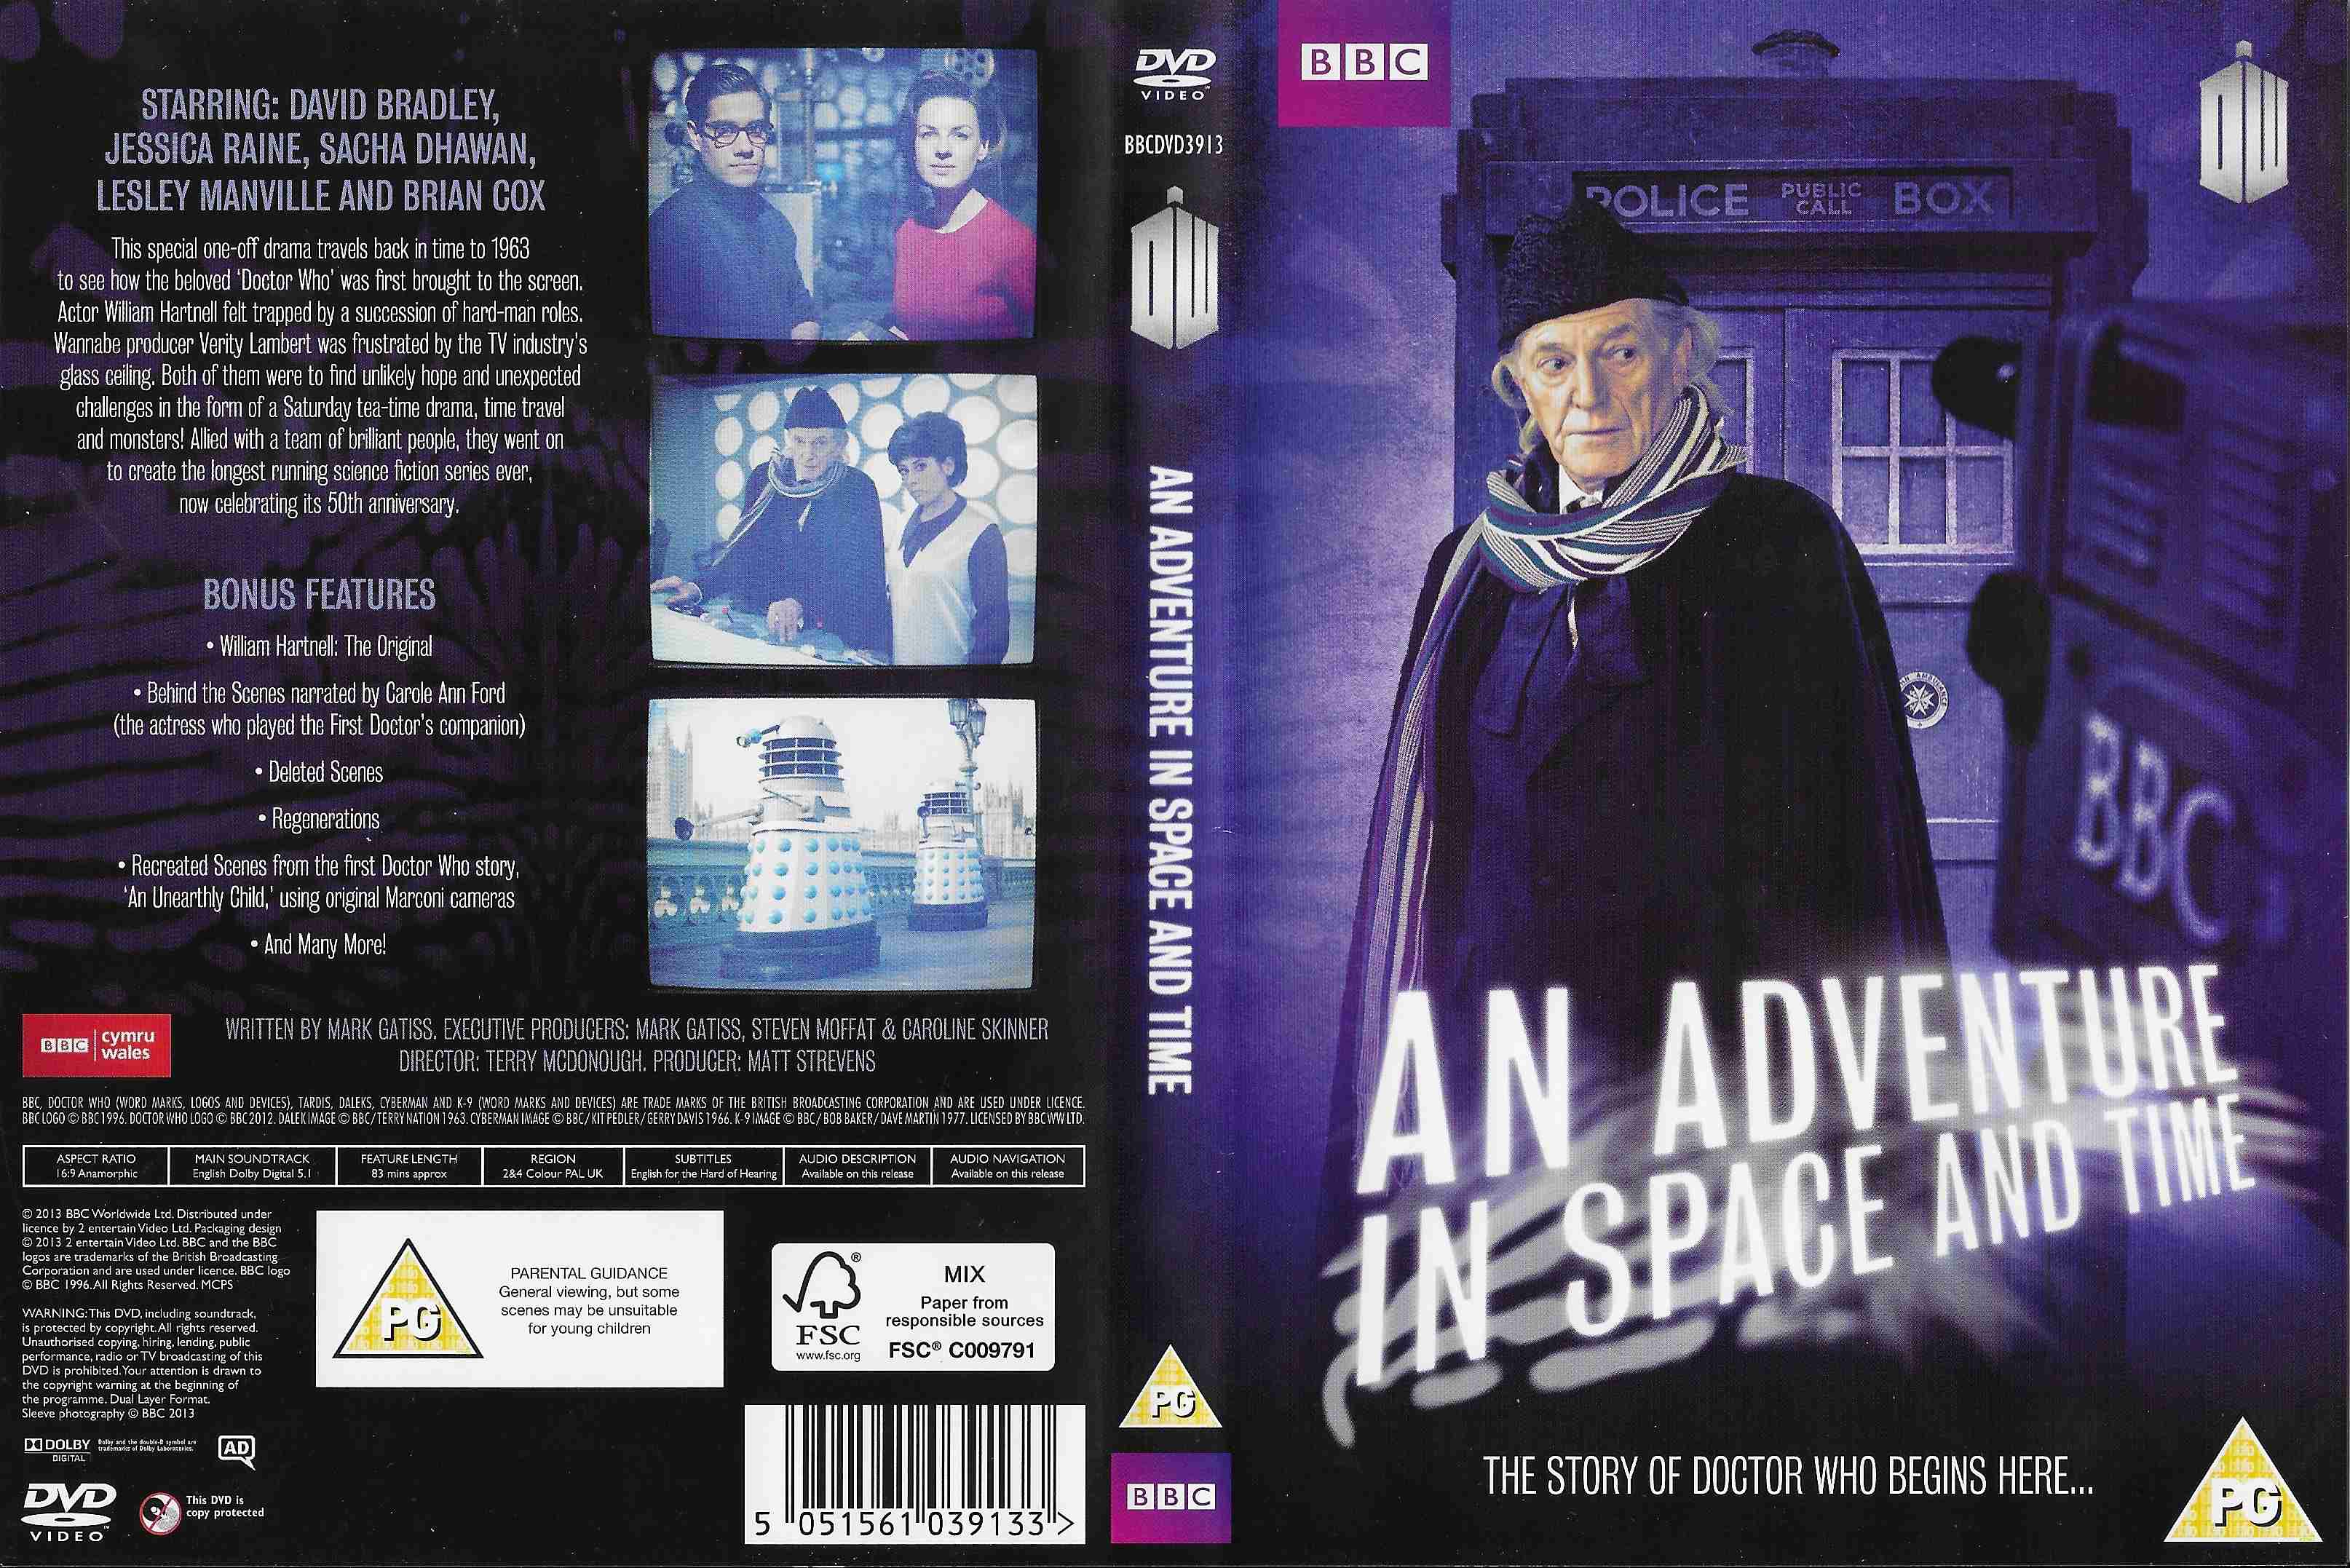 Picture of BBCDVD 3913 Doctor Who - An adventure in space and time by artist Mark Gatiss from the BBC records and Tapes library